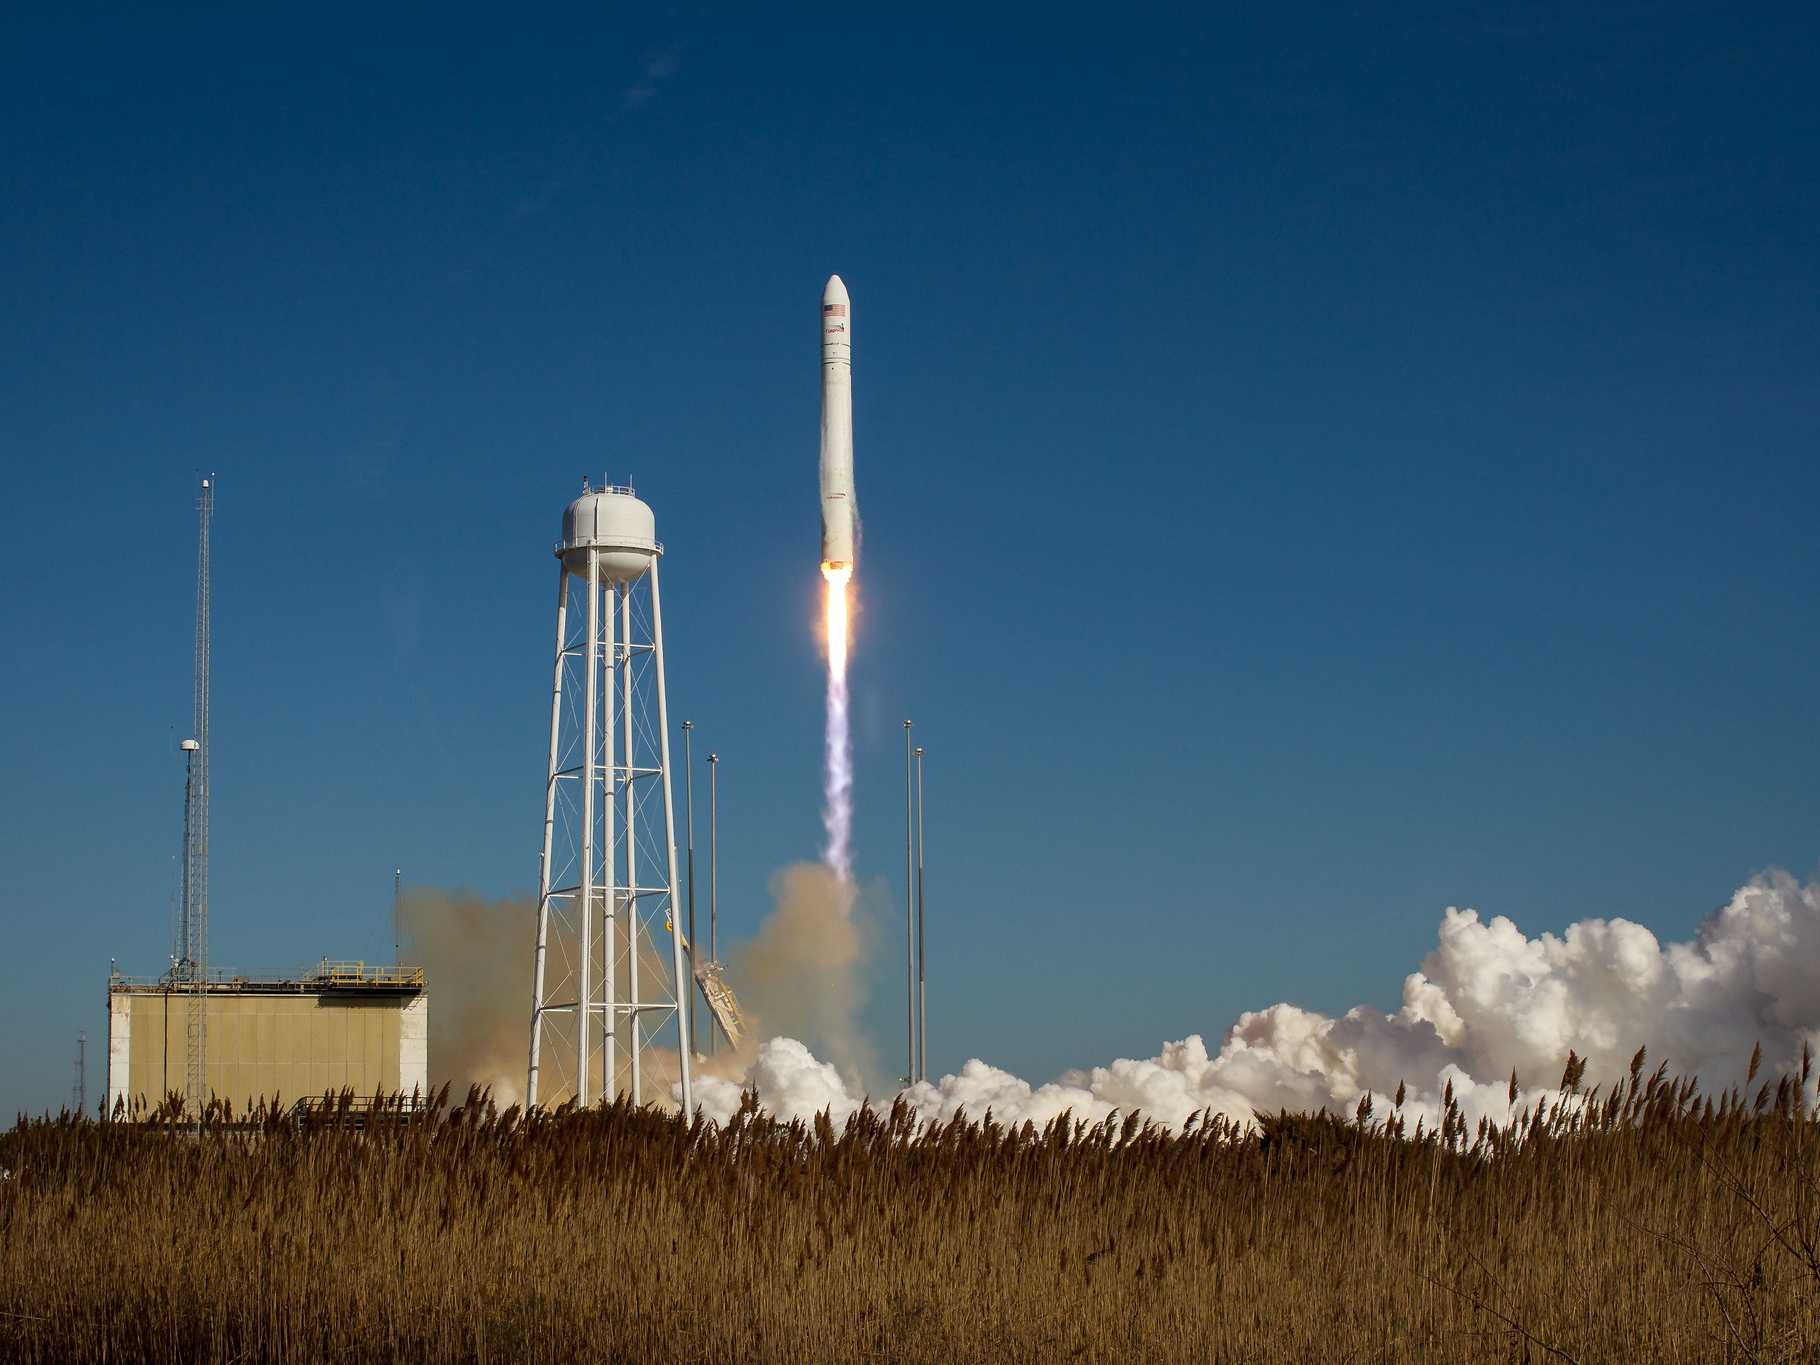 This rocket launched from Pad-0A at NASA's Wallops Flight Facility (Virginia) on Jan. 9, 2014, and also performed a resupply to the ISS—though it did not carry new toilet hardware.